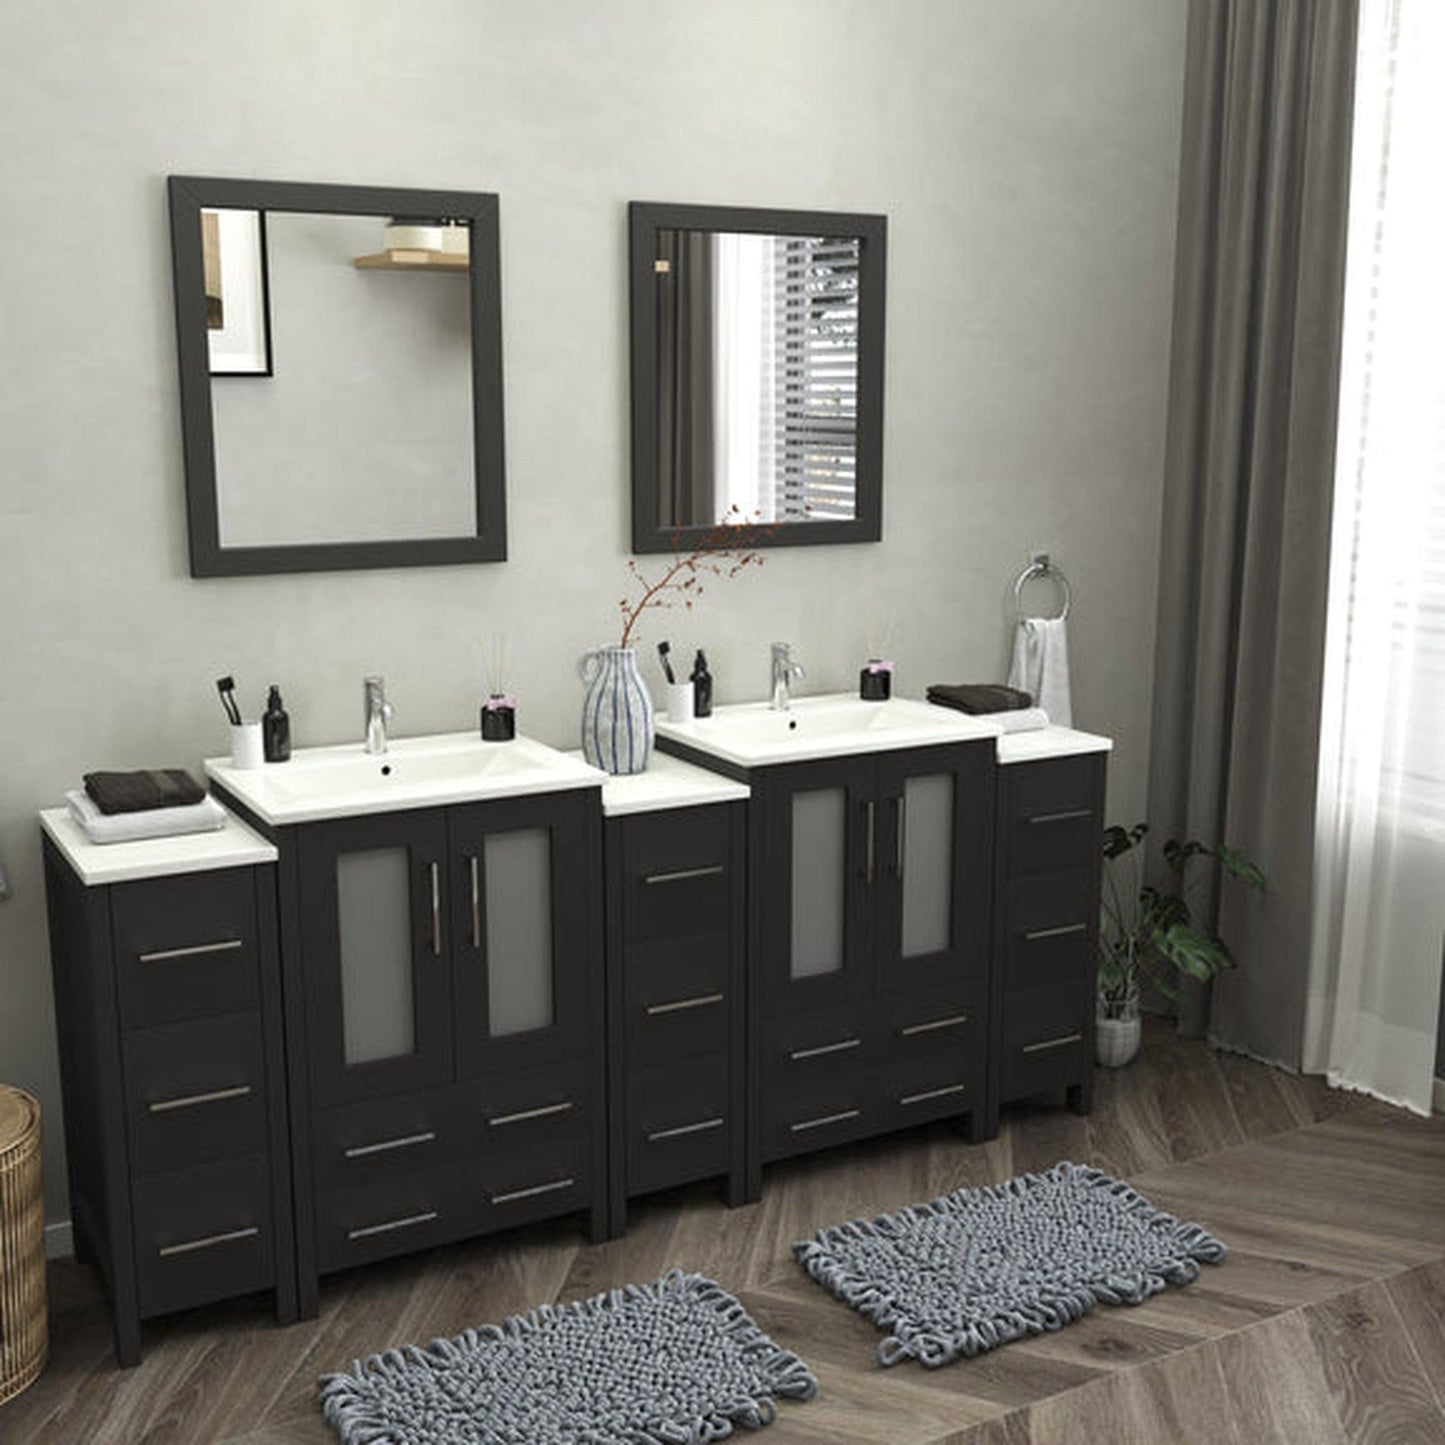 Vanity Art Brescia 84" Double Espresso Freestanding Vanity Set With With Integrated Ceramic Sink, 3 Side Cabinets and 2 Mirrors